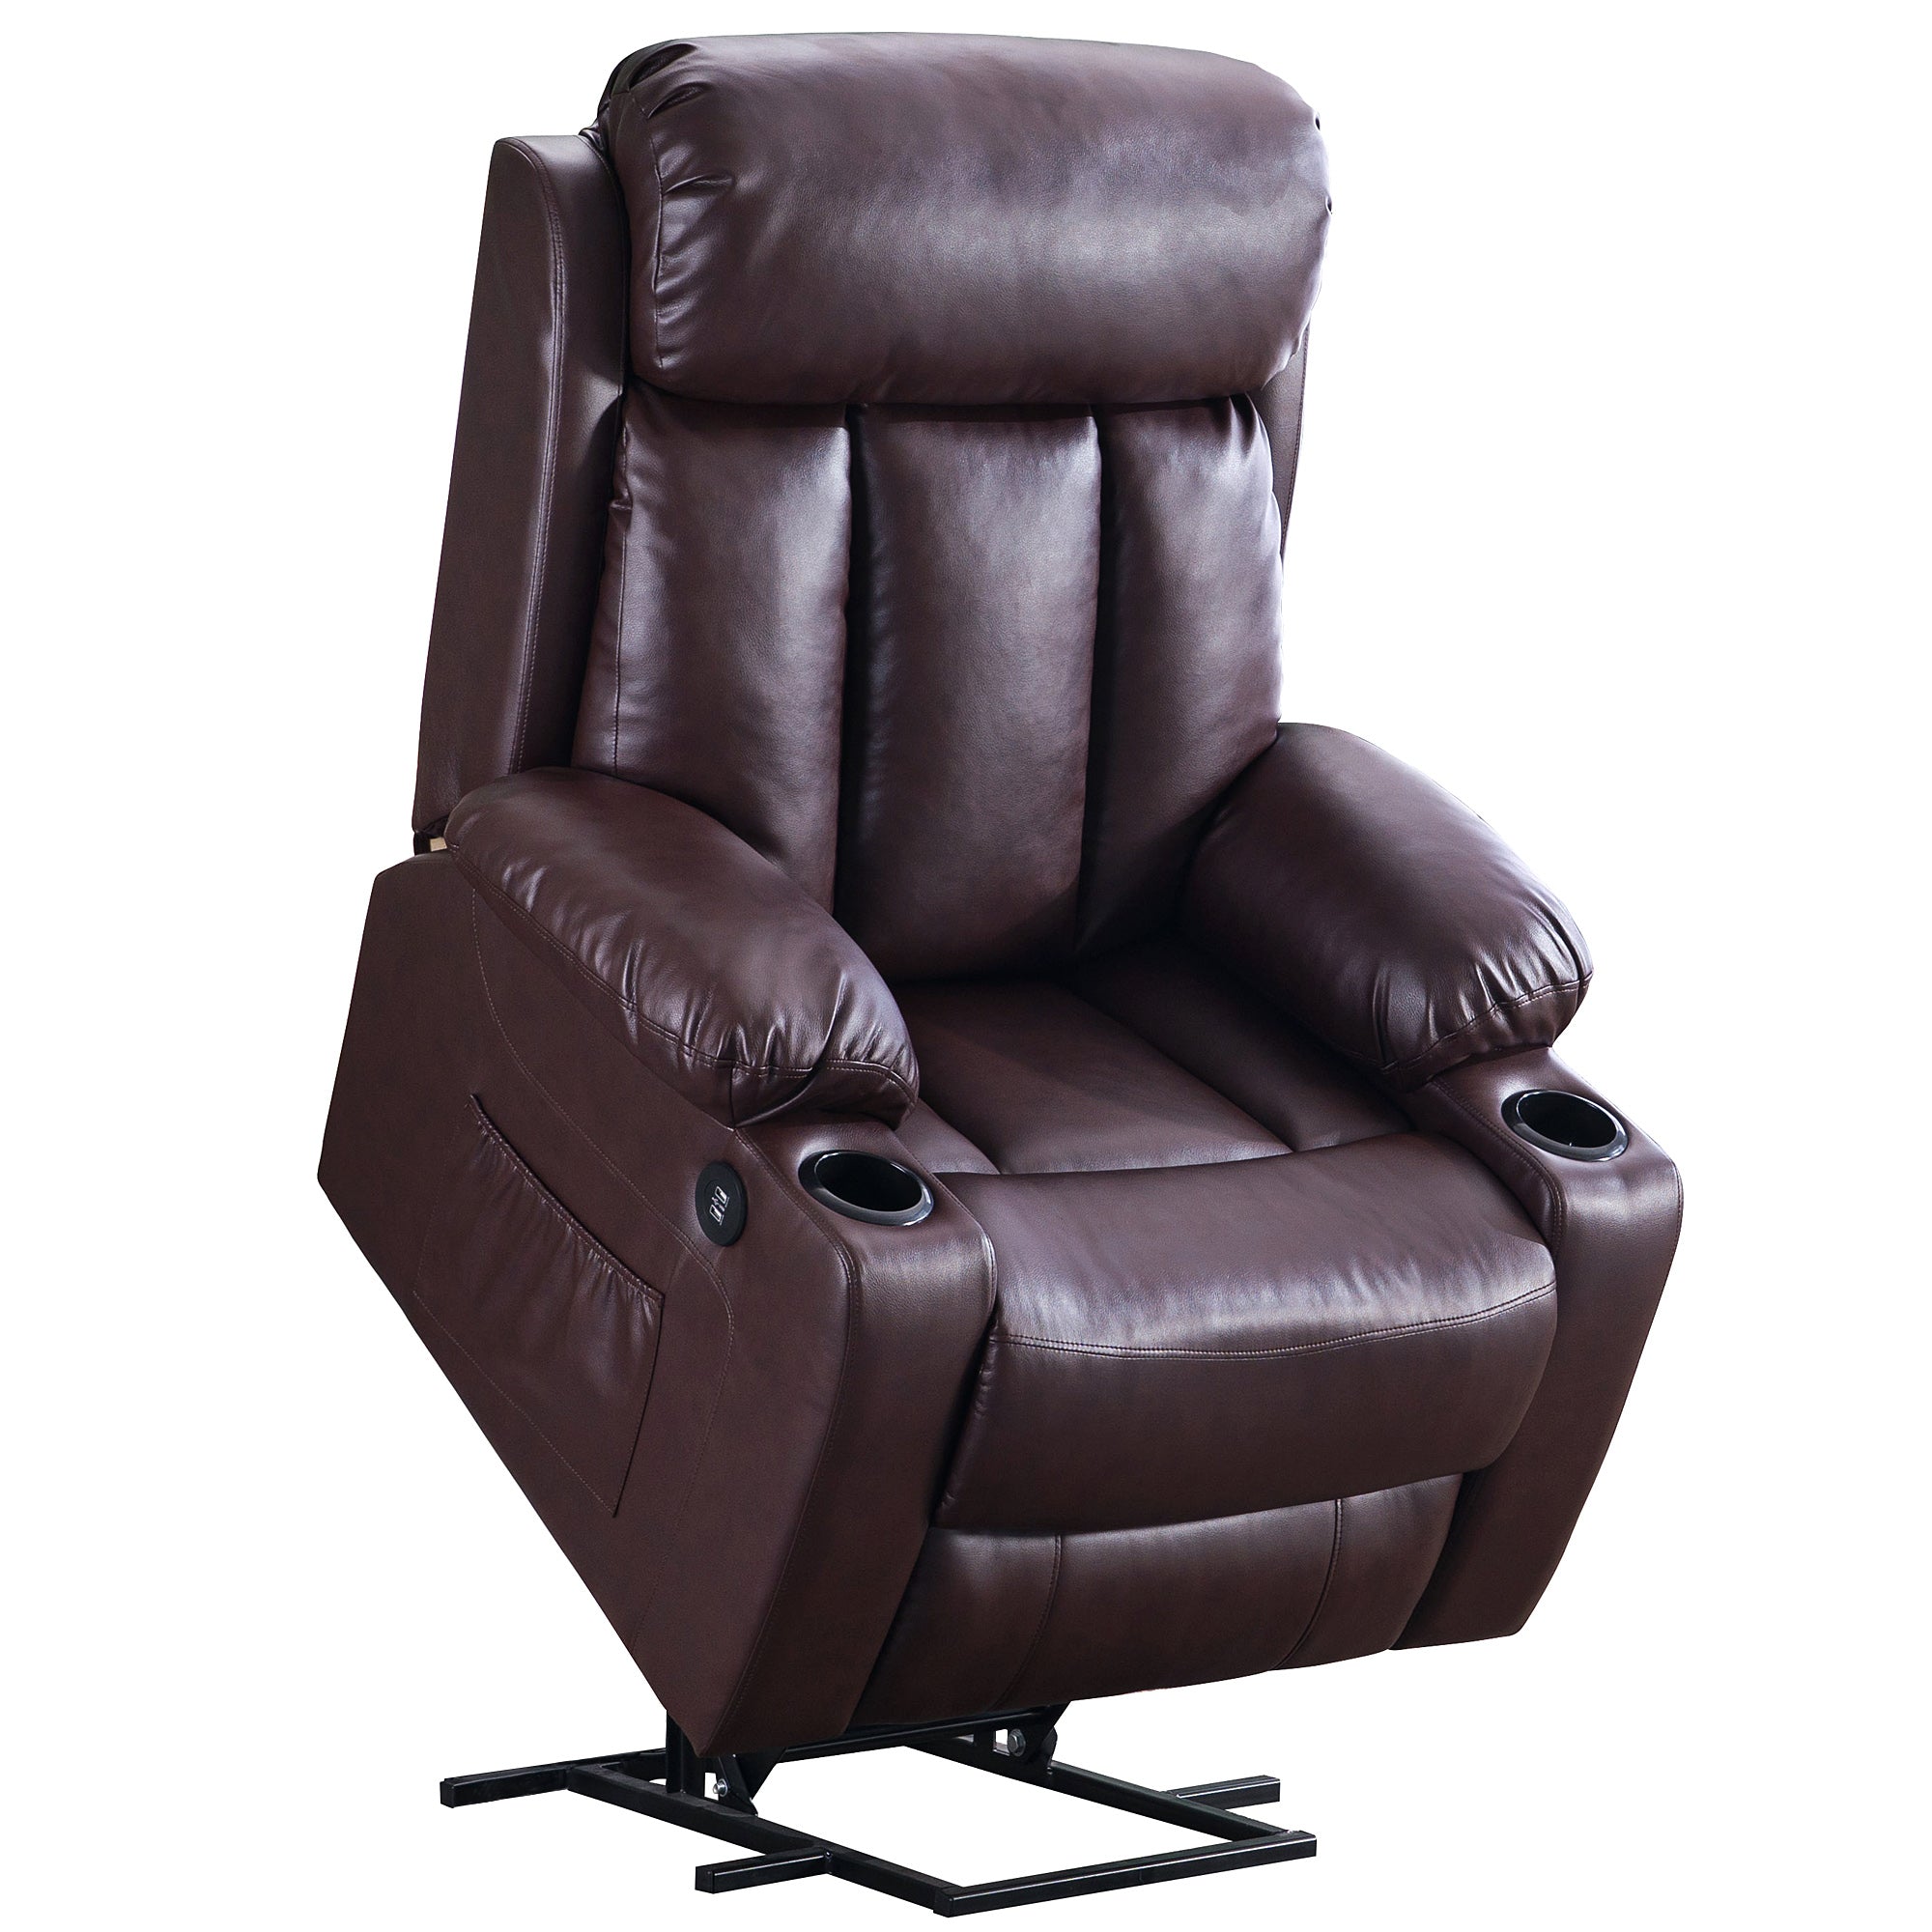 MCombo Large Power Lift Recliner Chair Sofa, without Extended Footrest, Faux Leather, Dark Brown 7406